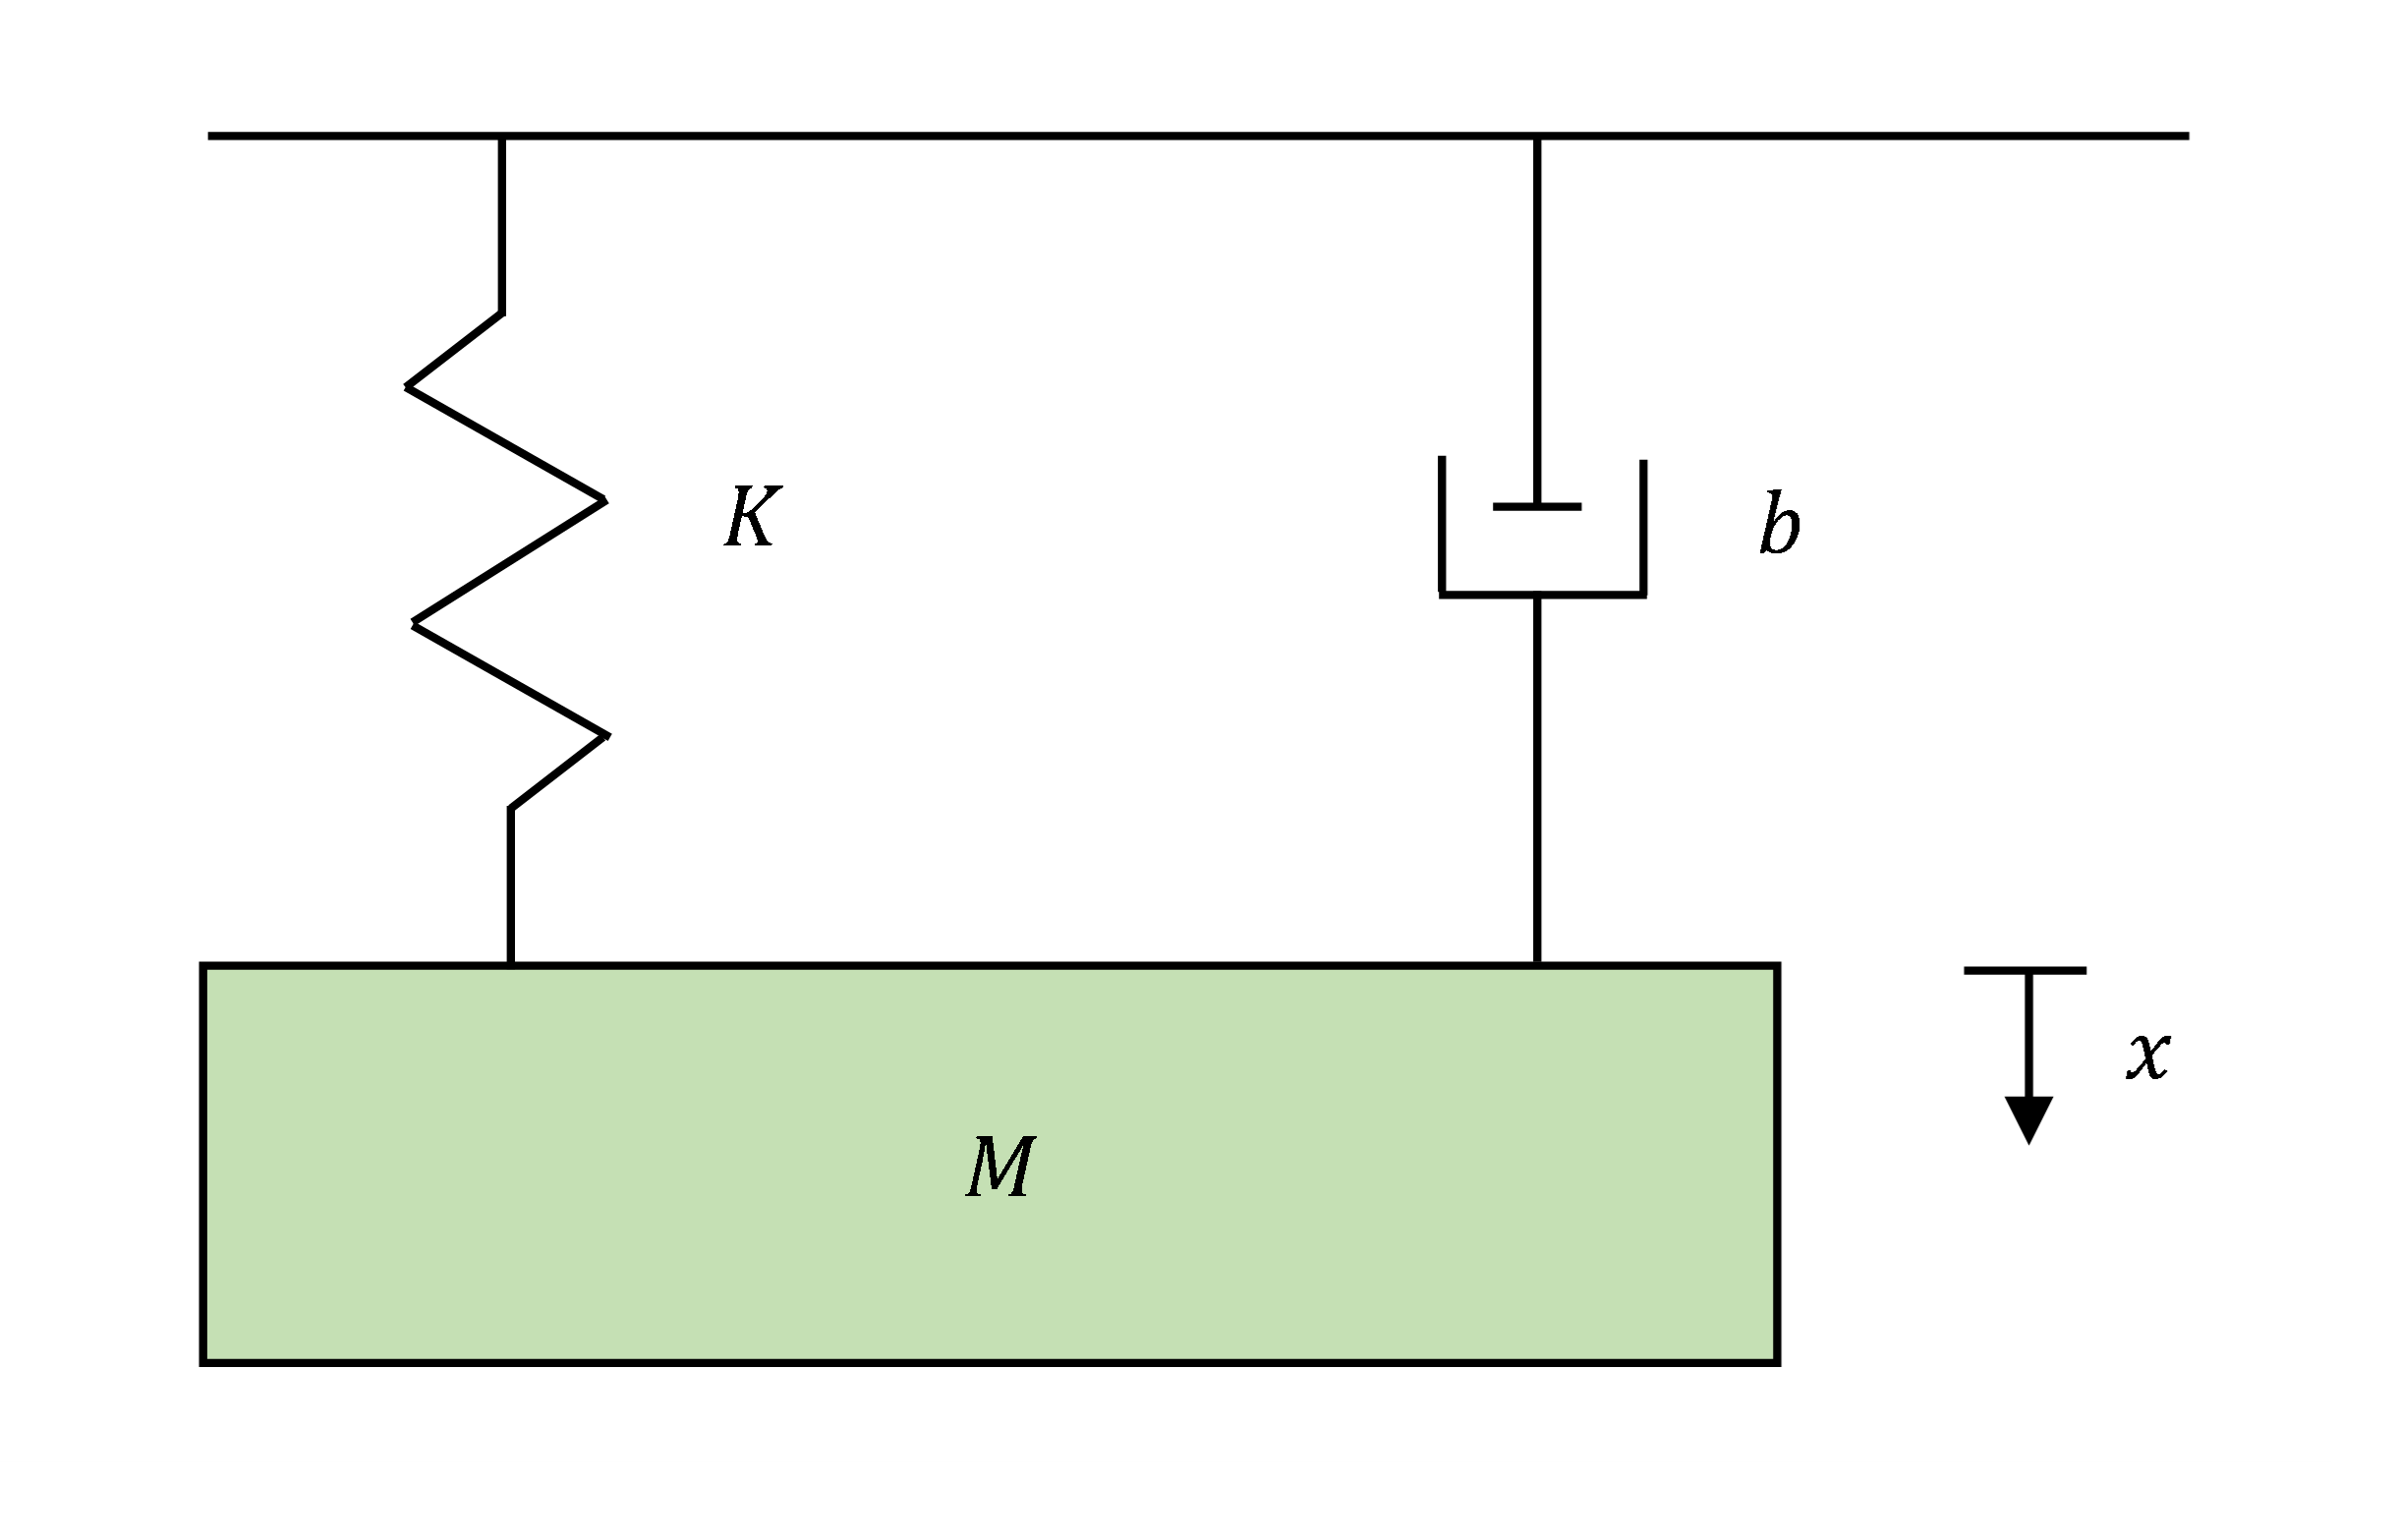 A mass M is suspended from a horizontal ceiling by a spring of spring constant k at one end, and a damper of damper coefficient b at the other end. The positive x-direction is defined as downwards.